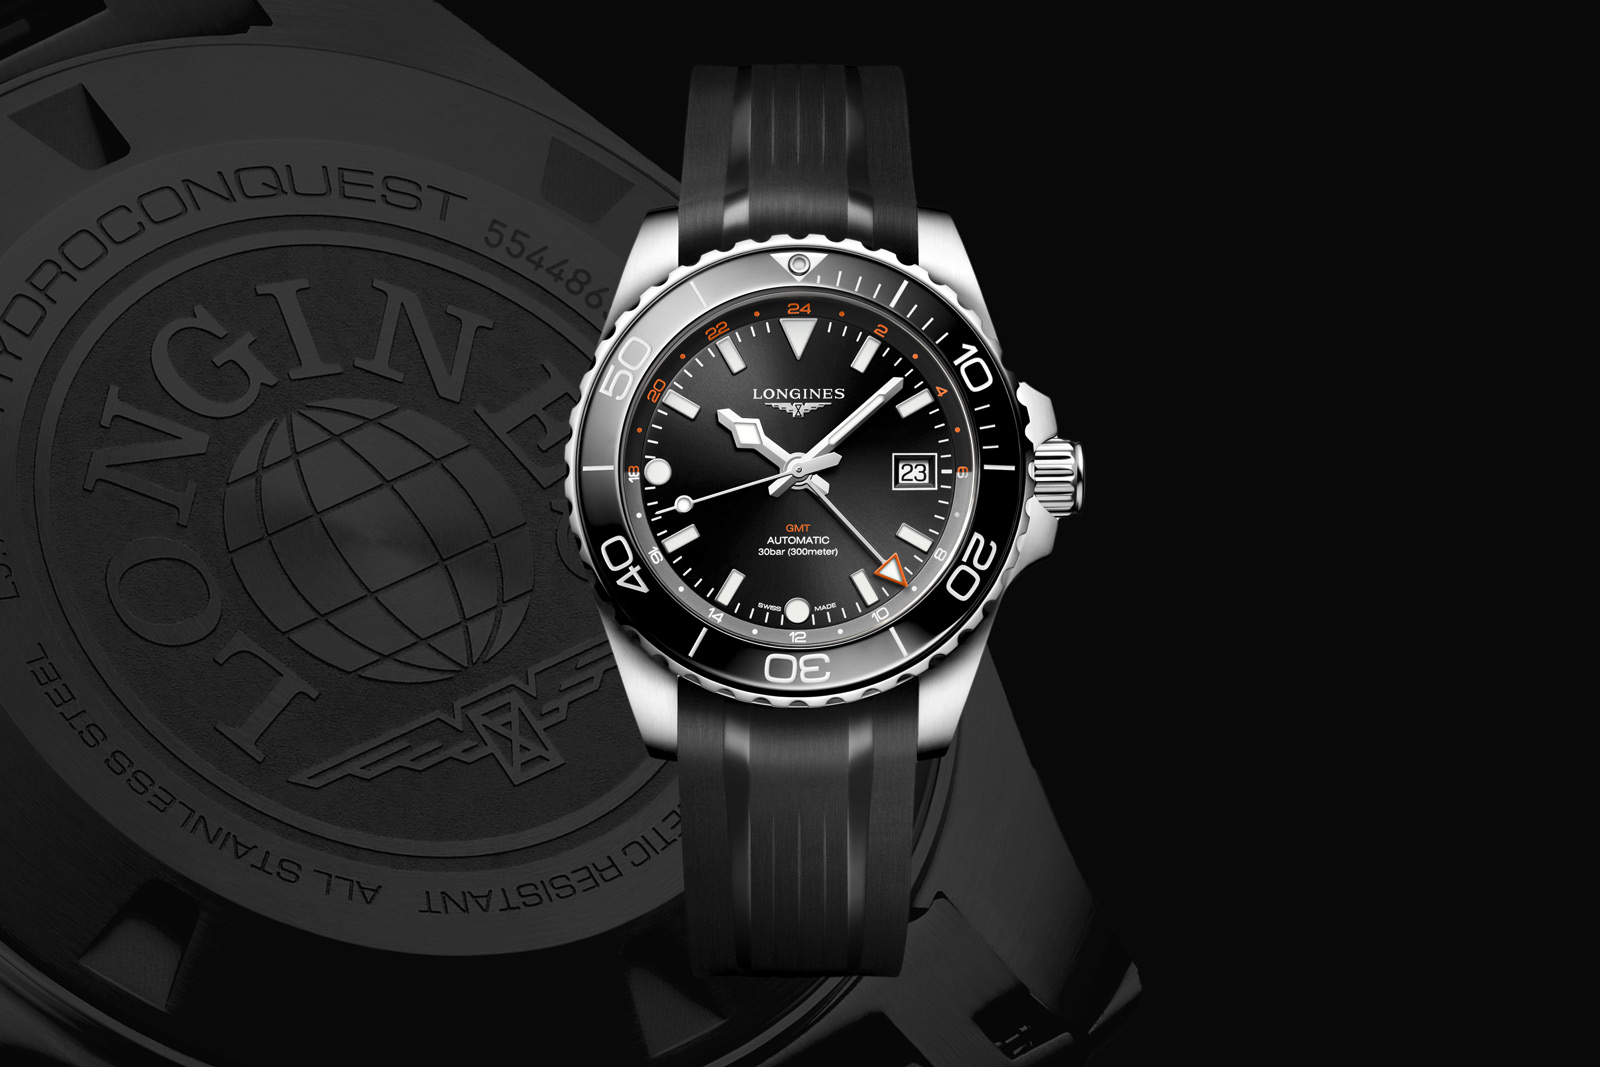 The Longines Hydroconquest is Now a True GMT | SJX Watches